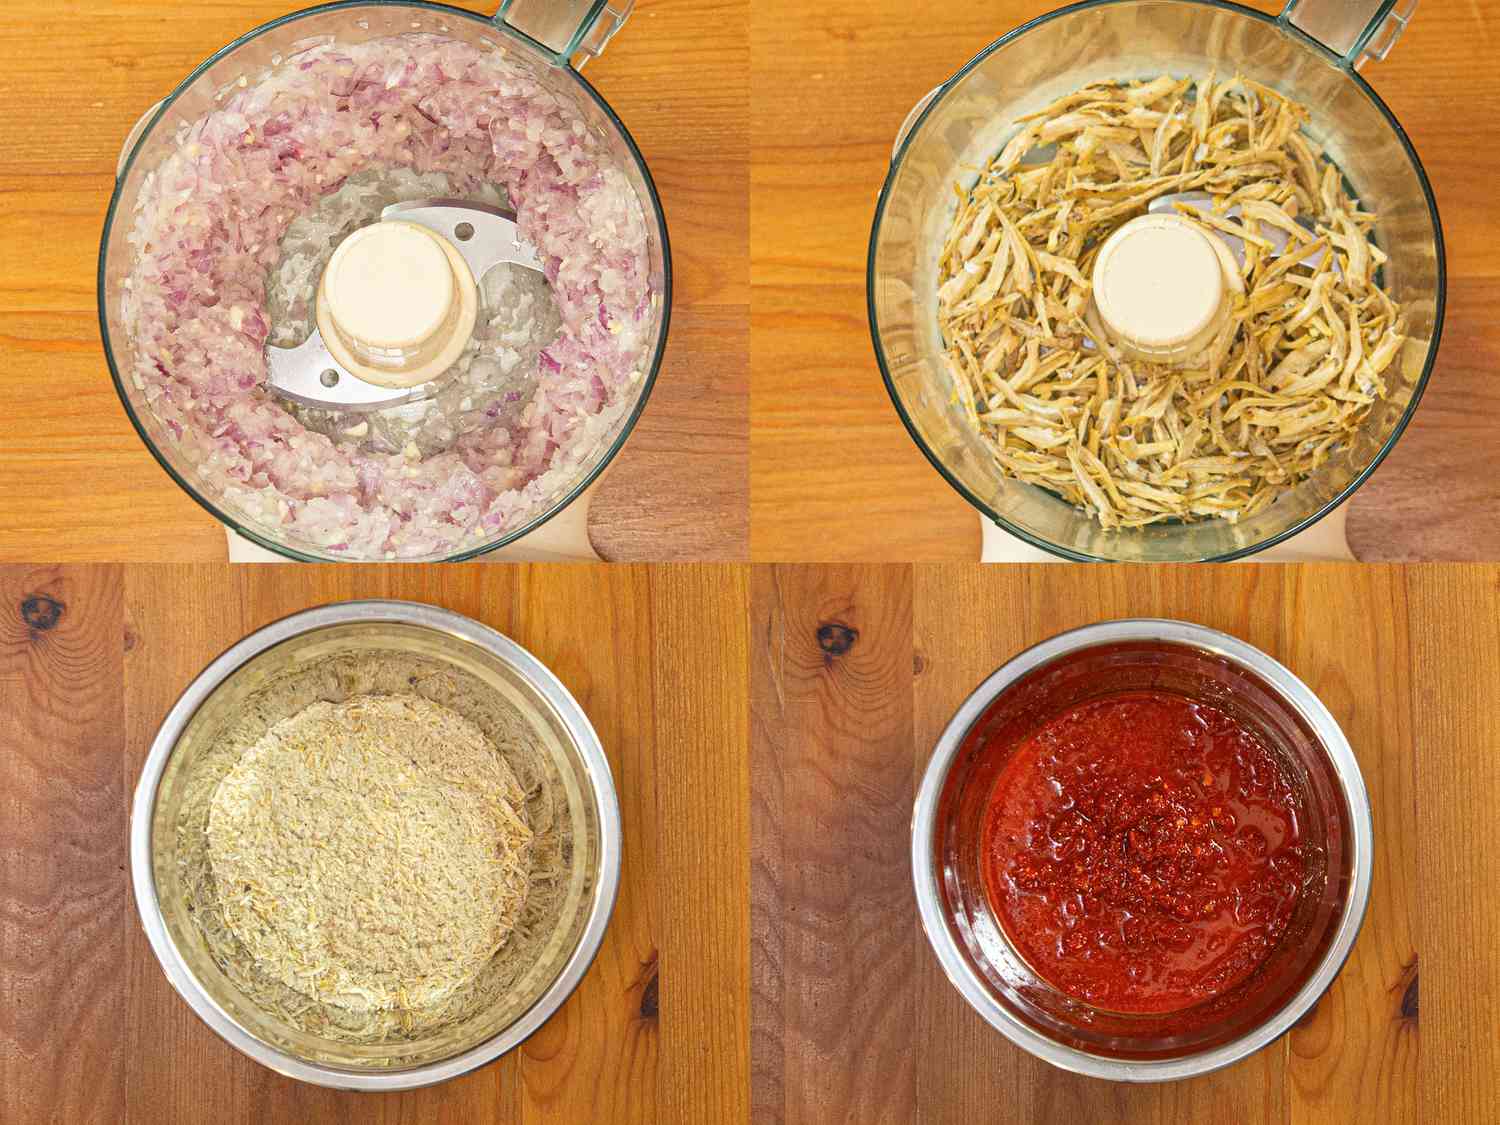 Four image collage of onion processed in a food processor, ikon billis before and after being processed, and chile paste in a bowl